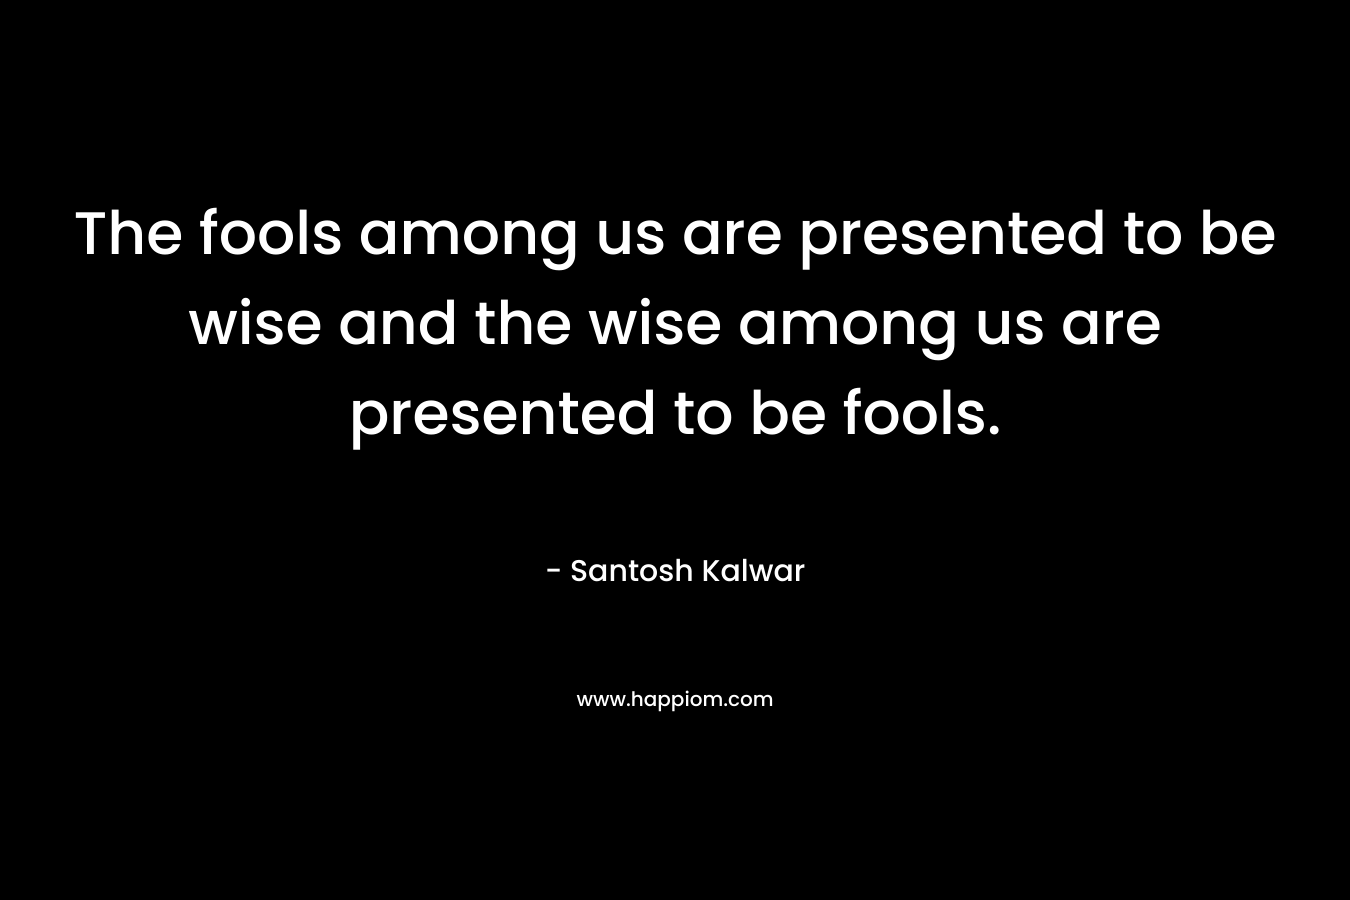 The fools among us are presented to be wise and the wise among us are presented to be fools. – Santosh Kalwar